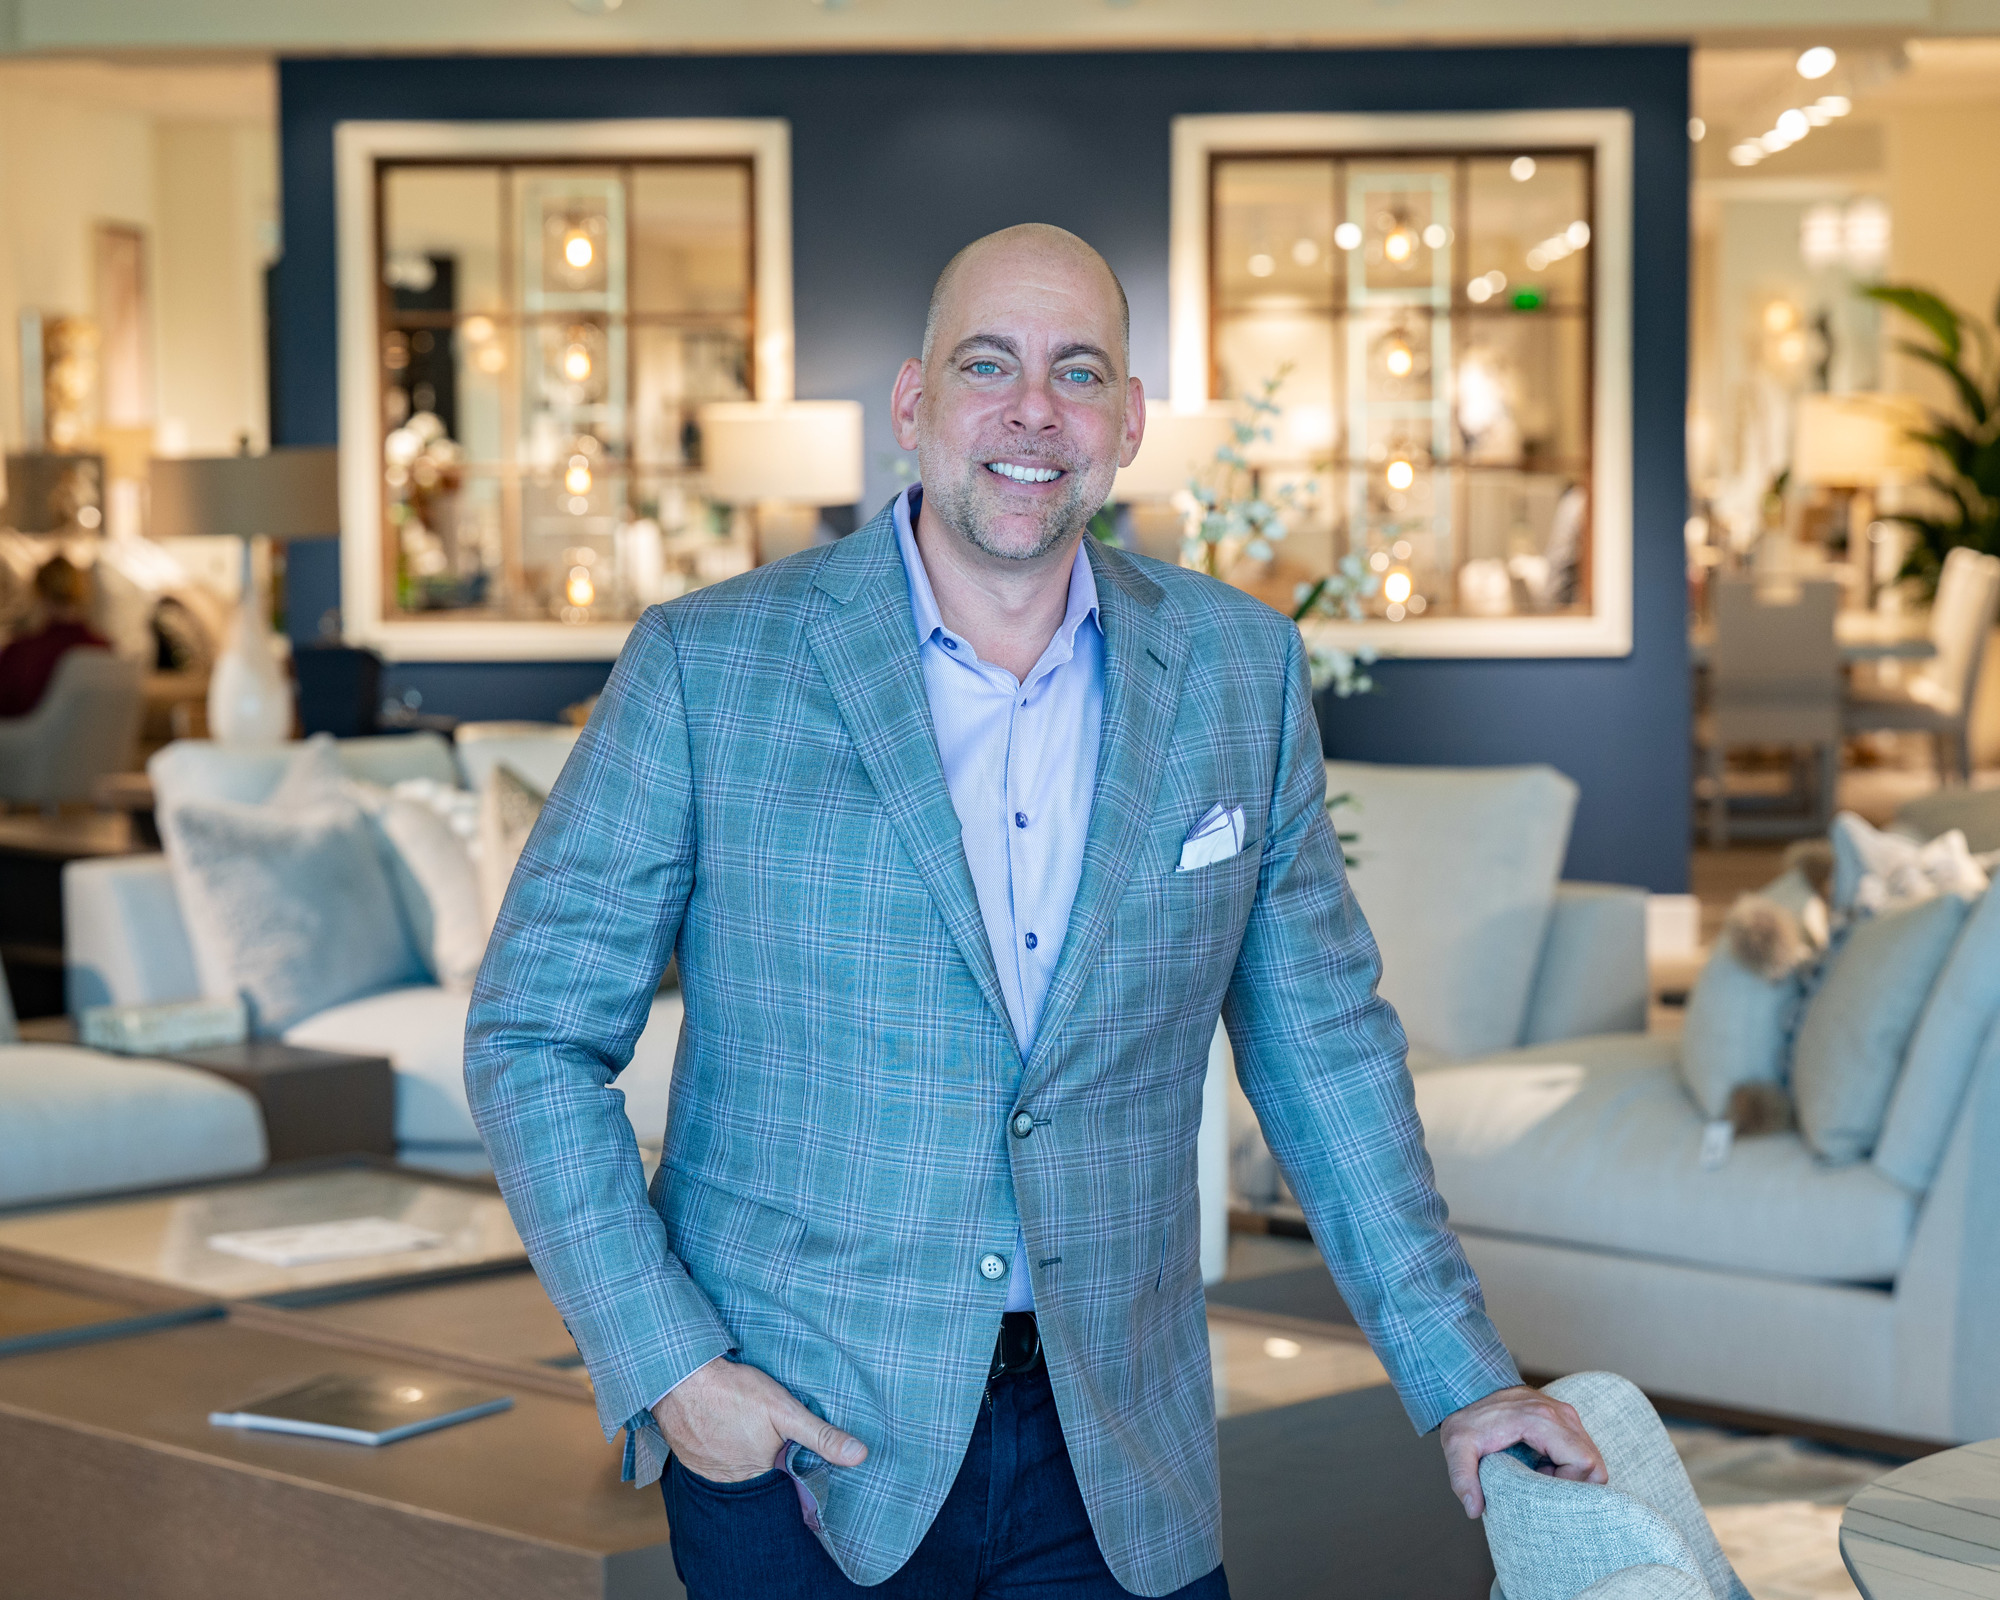 The third store in the Clive Daniel Home that popped up in Sarasota was always a question of when rather if, Daniel Lubner says. (Photo by Lori Sax)